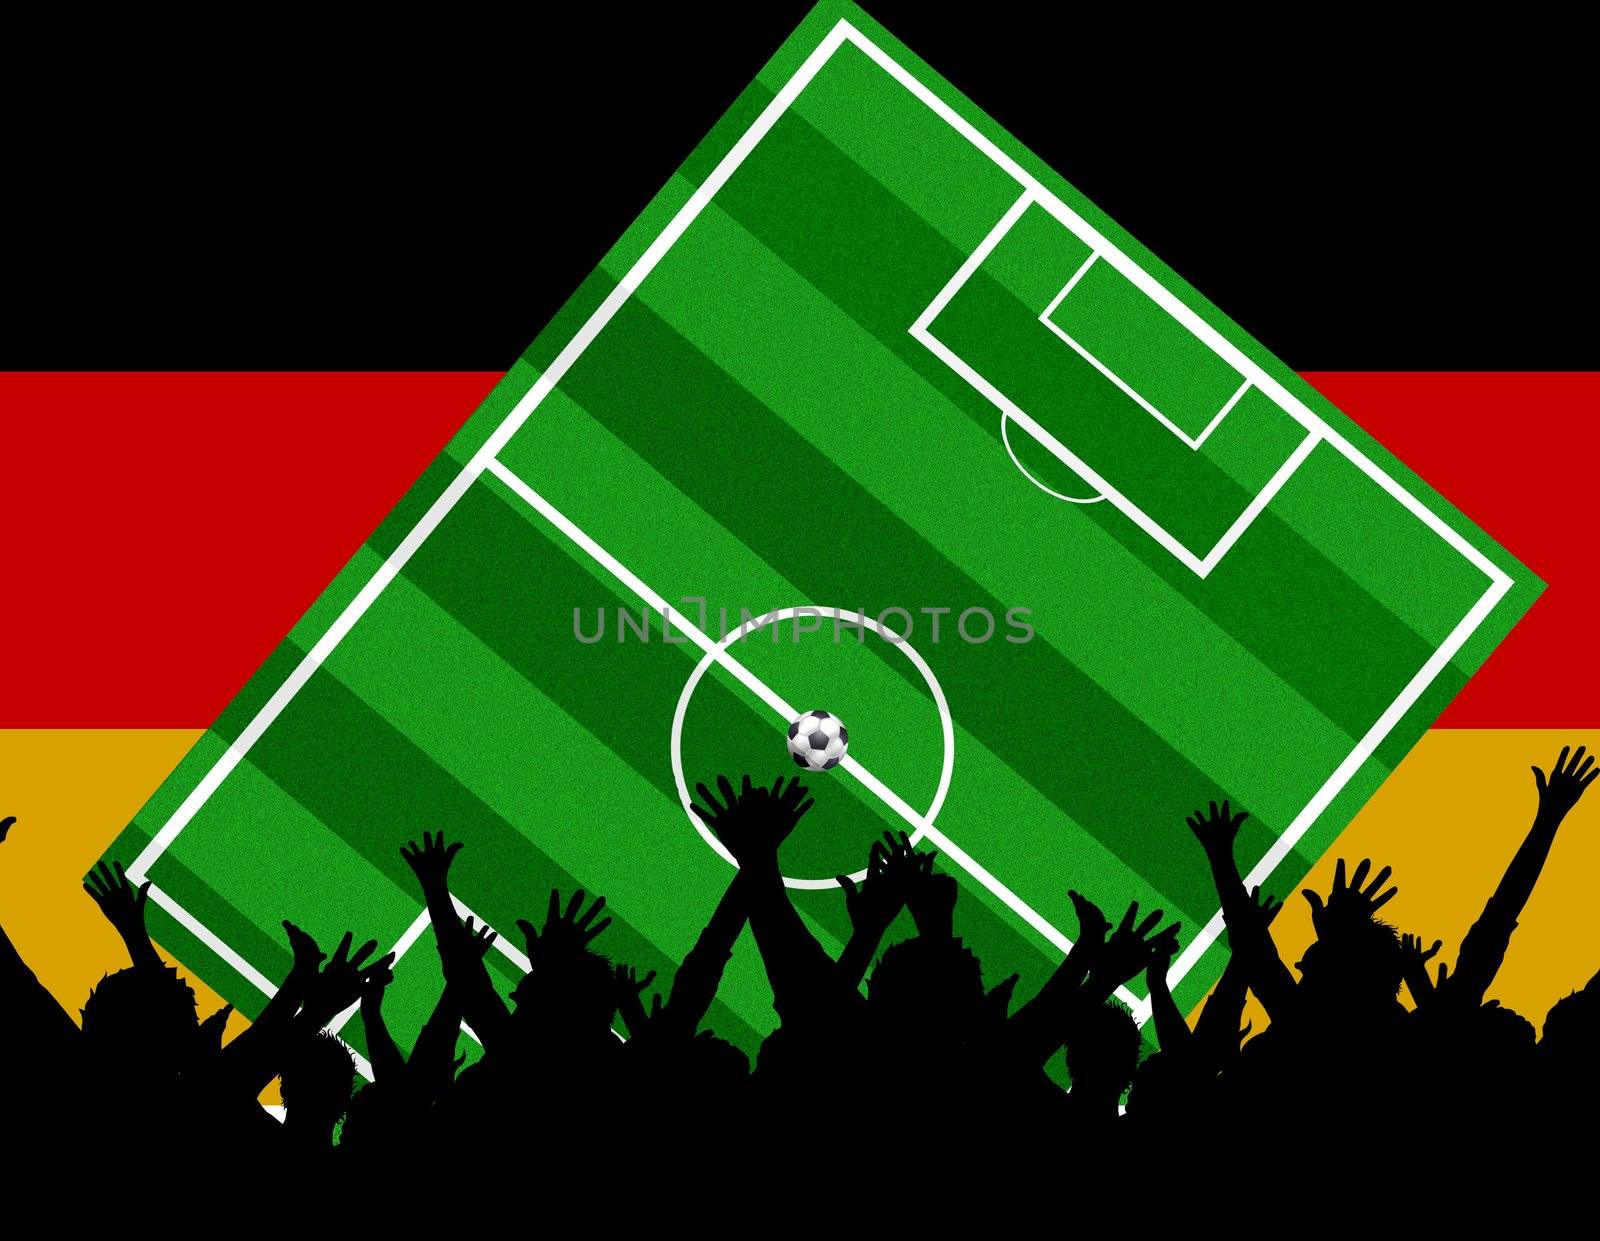 soccerfield and cheering audience with national flag